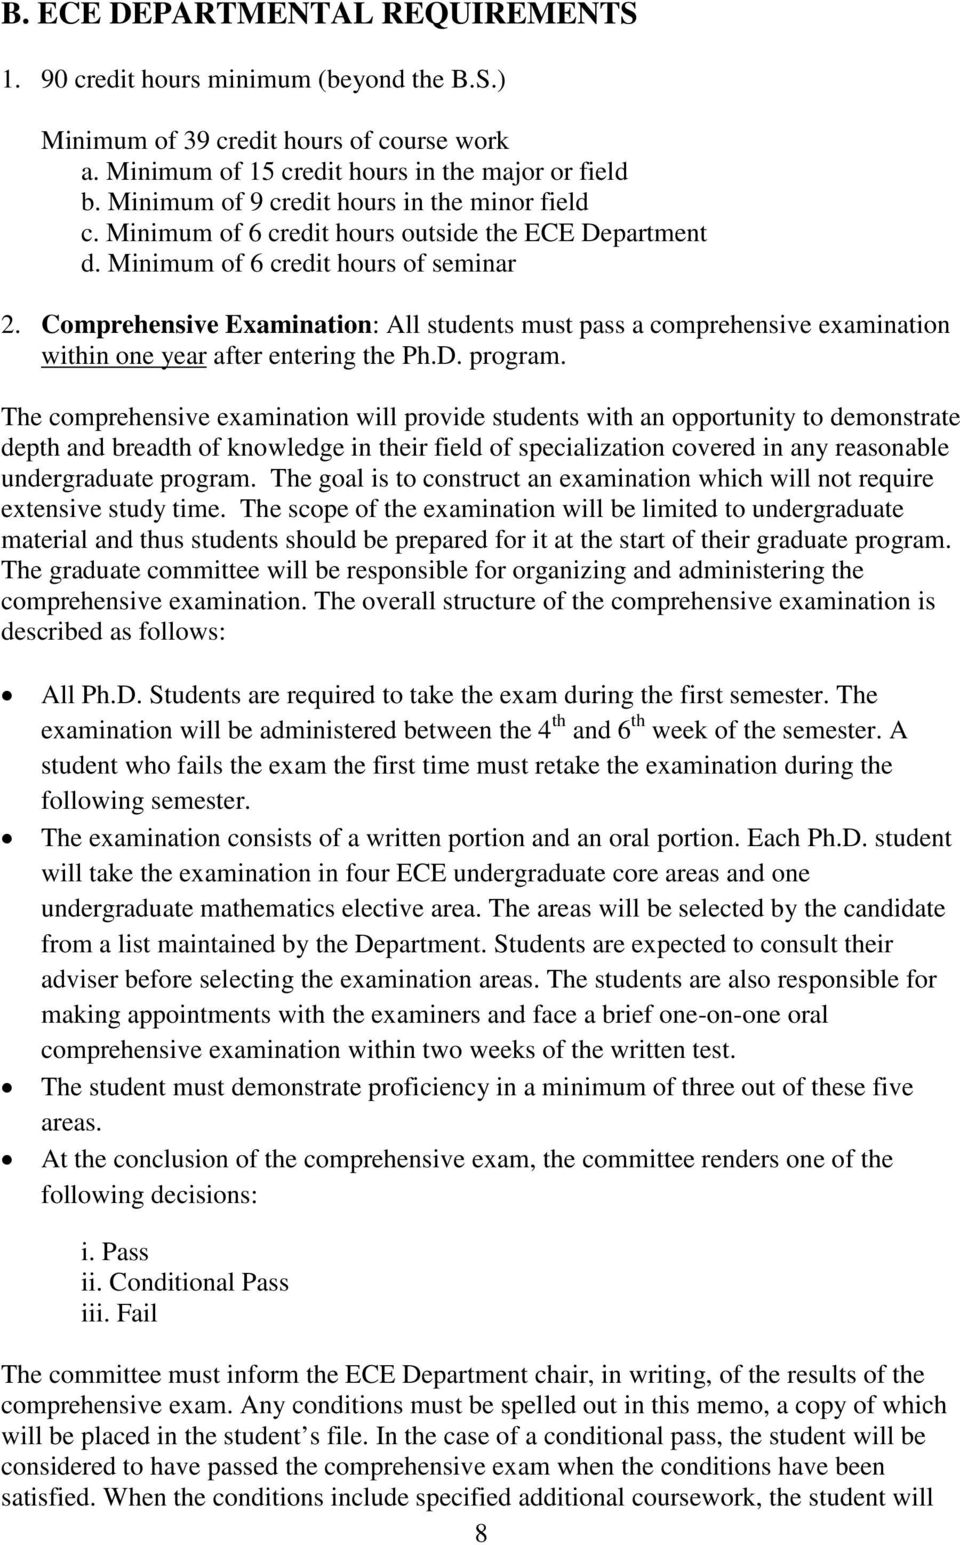 Comprehensive Examination: All students must pass a comprehensive examination within one year after entering the Ph.D. program.